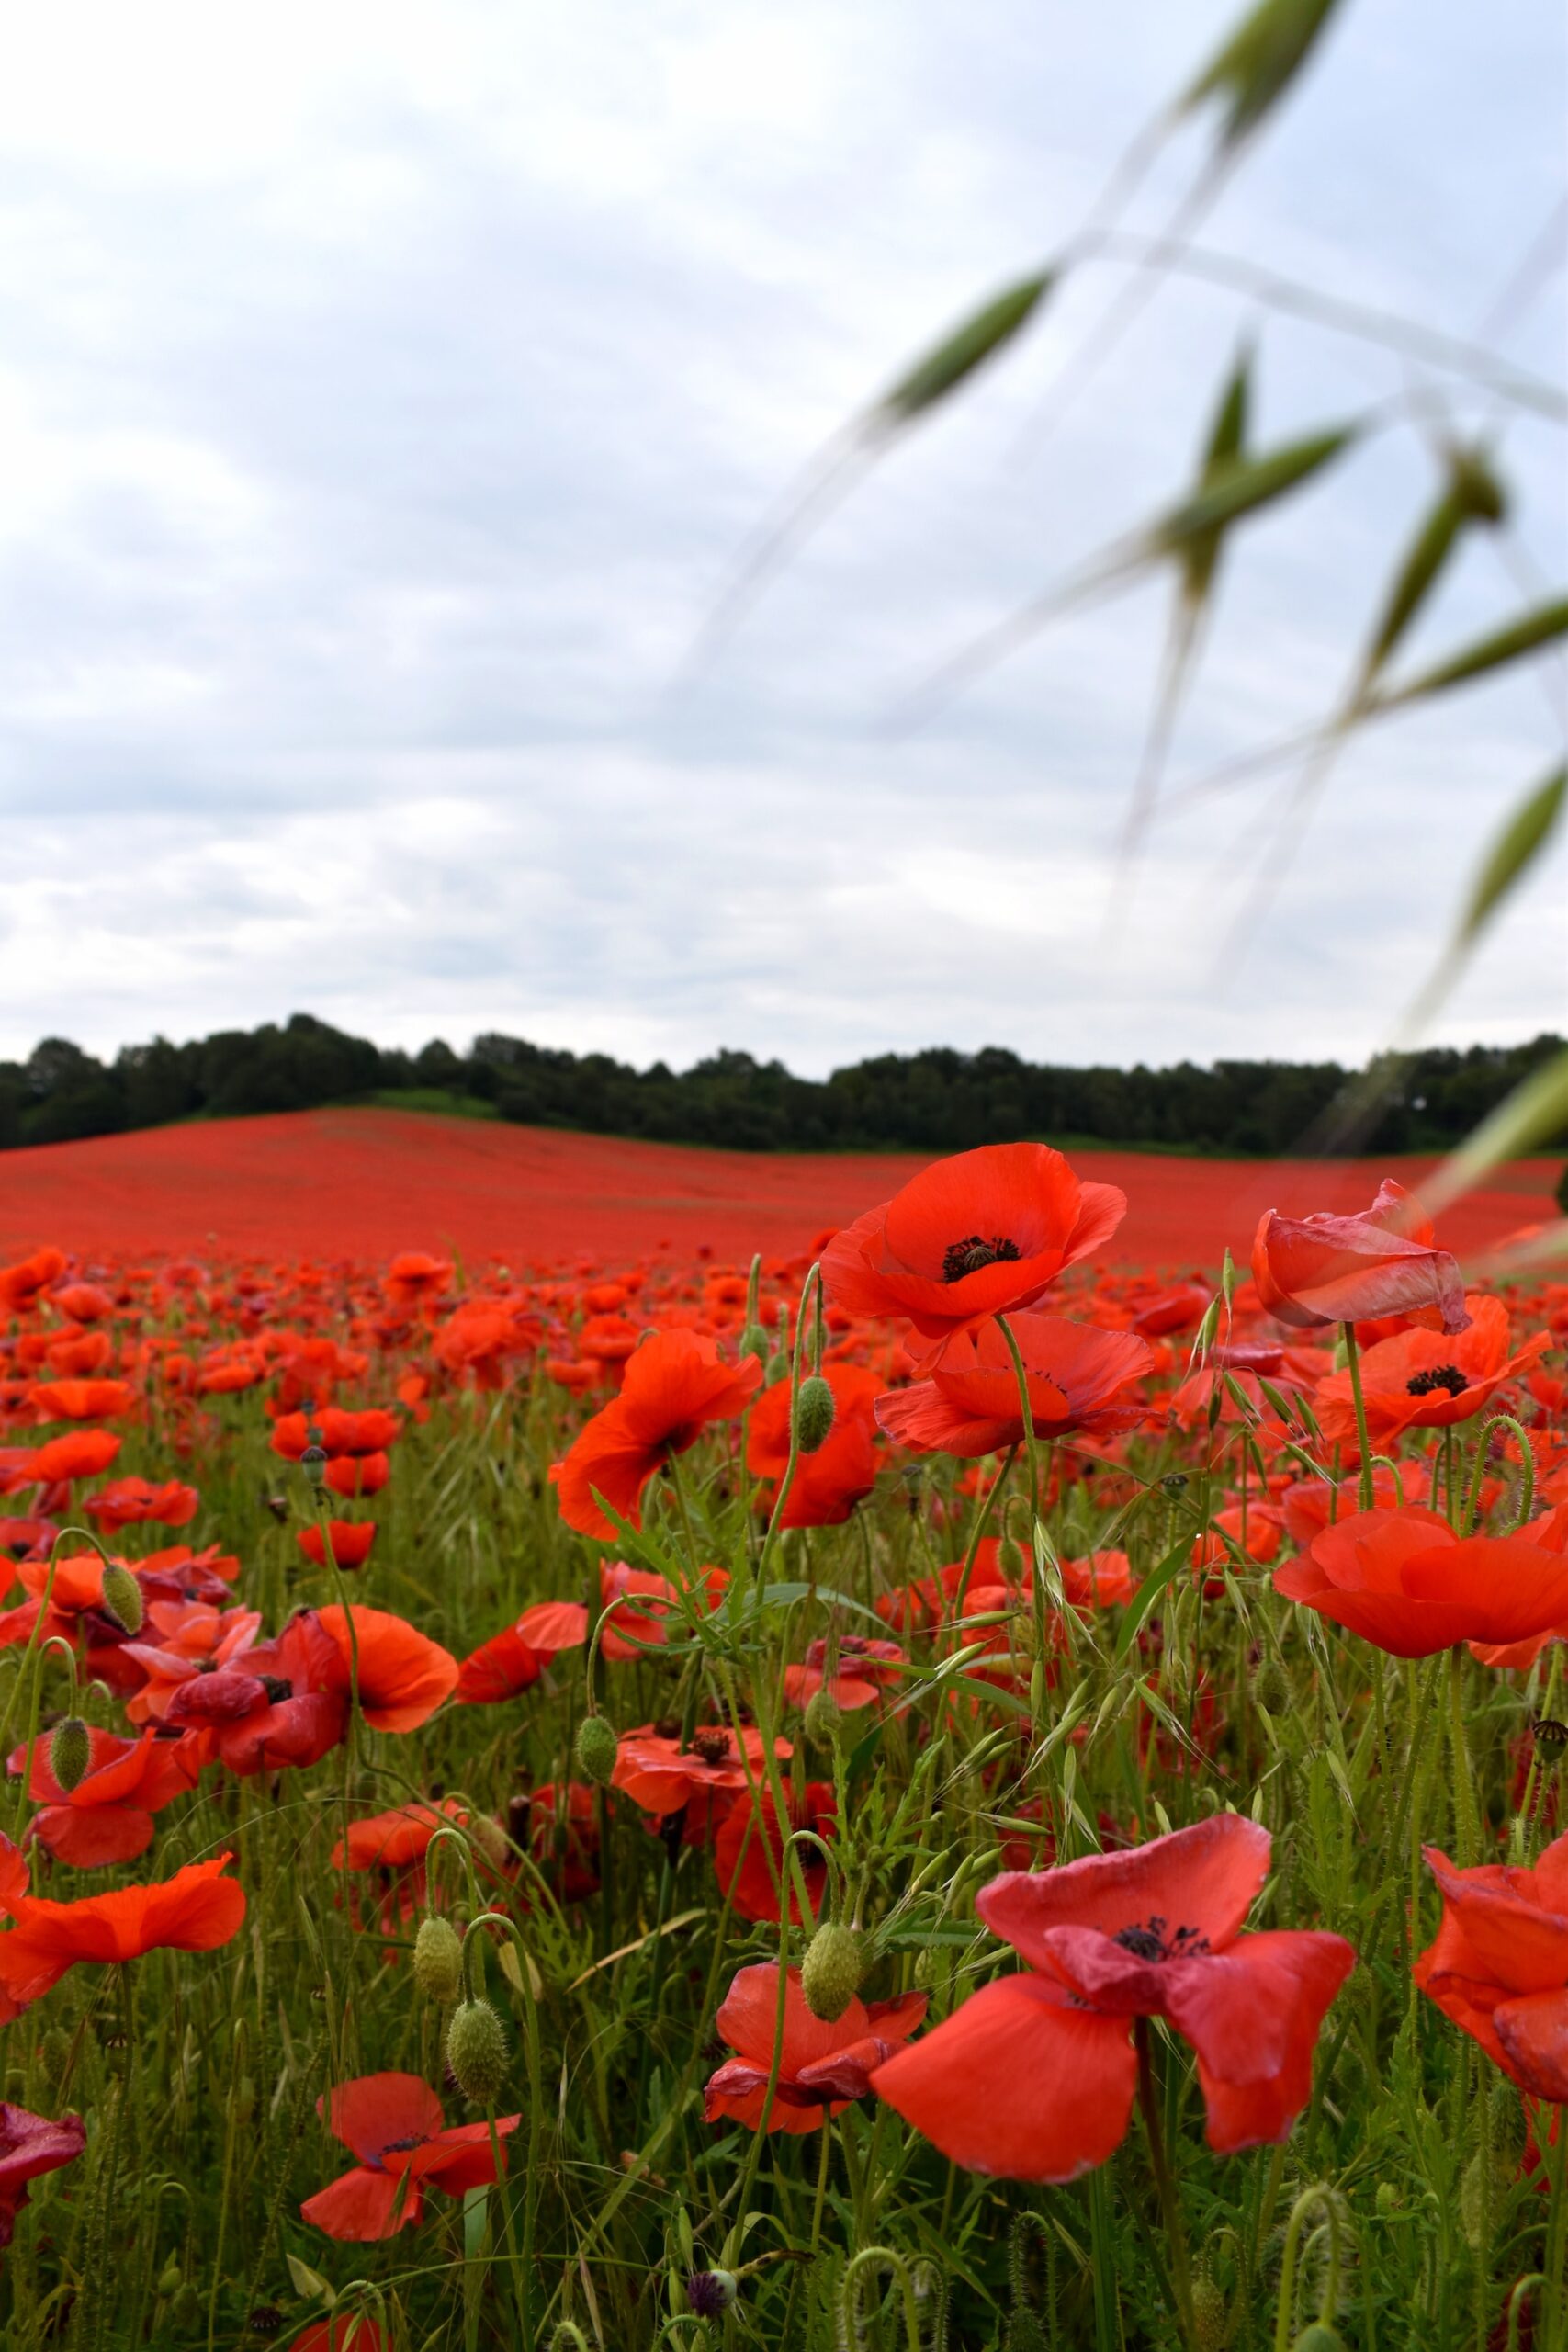 Are you suffering from tall poppy syndrome in the office?  Are your colleagues trying to cut you down - or perhaps it's you taking them down to size.